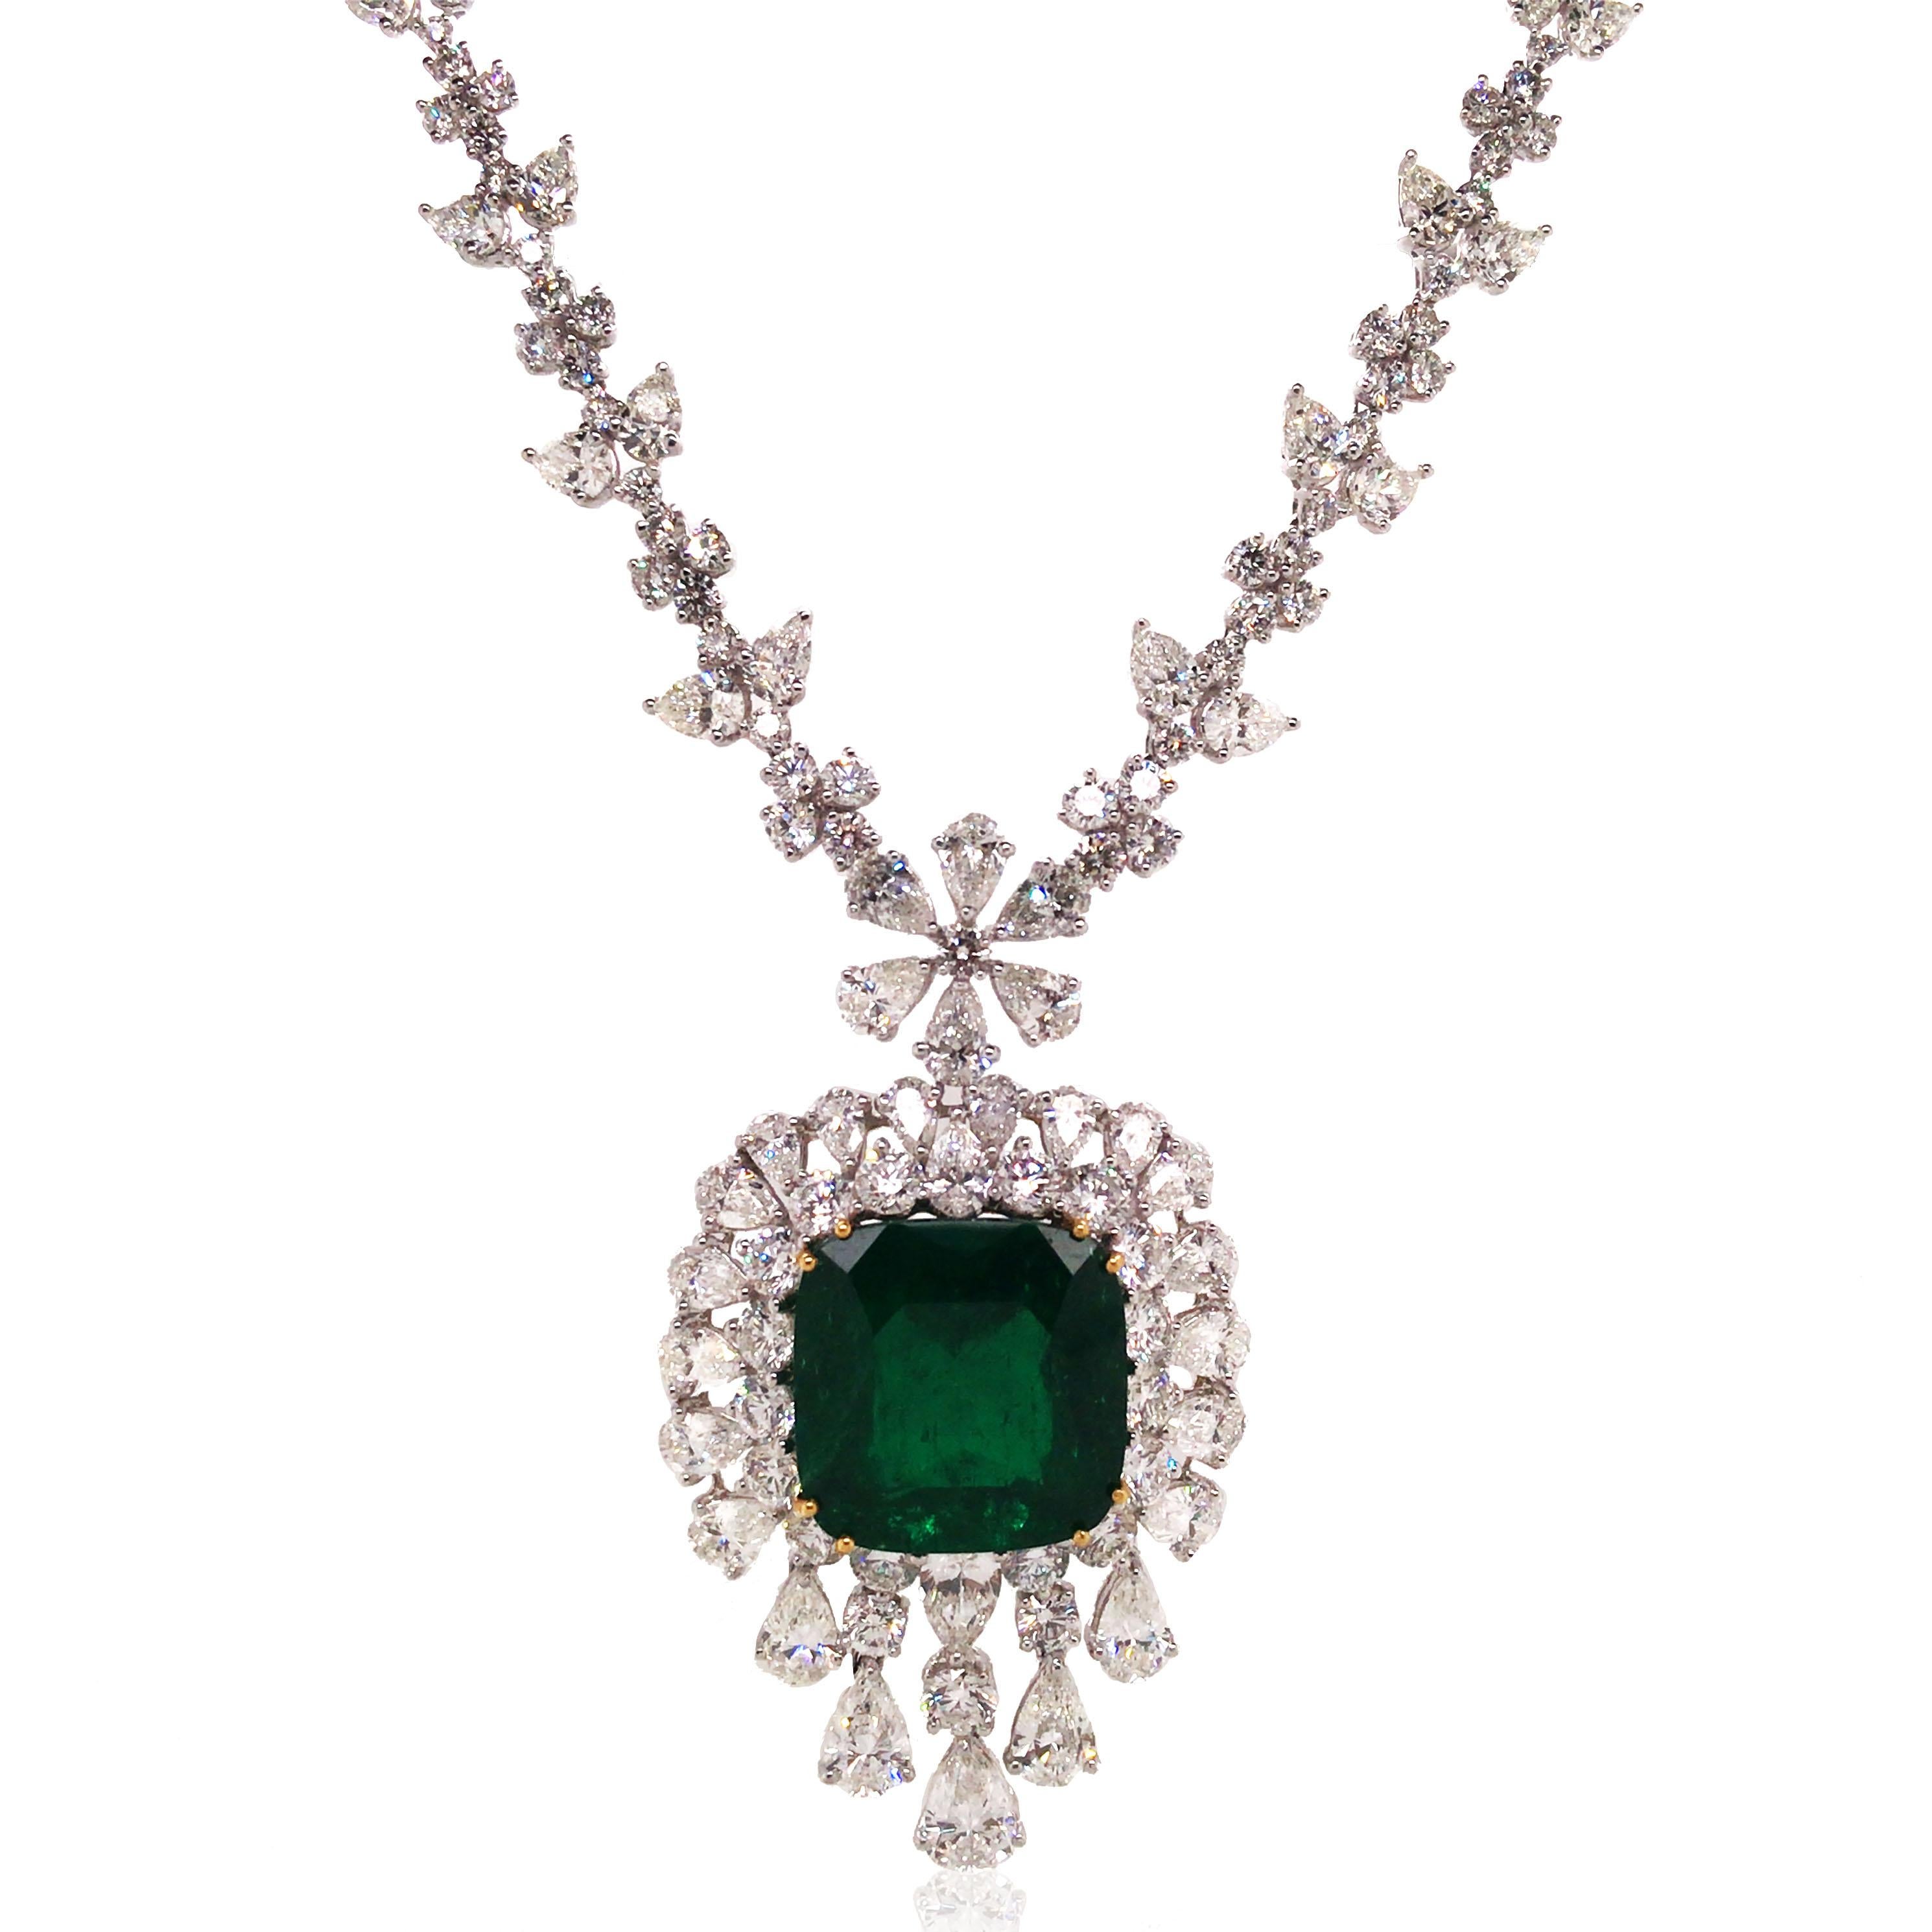 This emerald diamond necklace is finely crafted in 18k gold and platinum. It consists of 1 emerald-cut emerald, 93 pear-cut diamonds and 220 round-cut diamonds. The emerald approx. 20ct and the diamond approx. 33.8ct in total. 

Diamond: